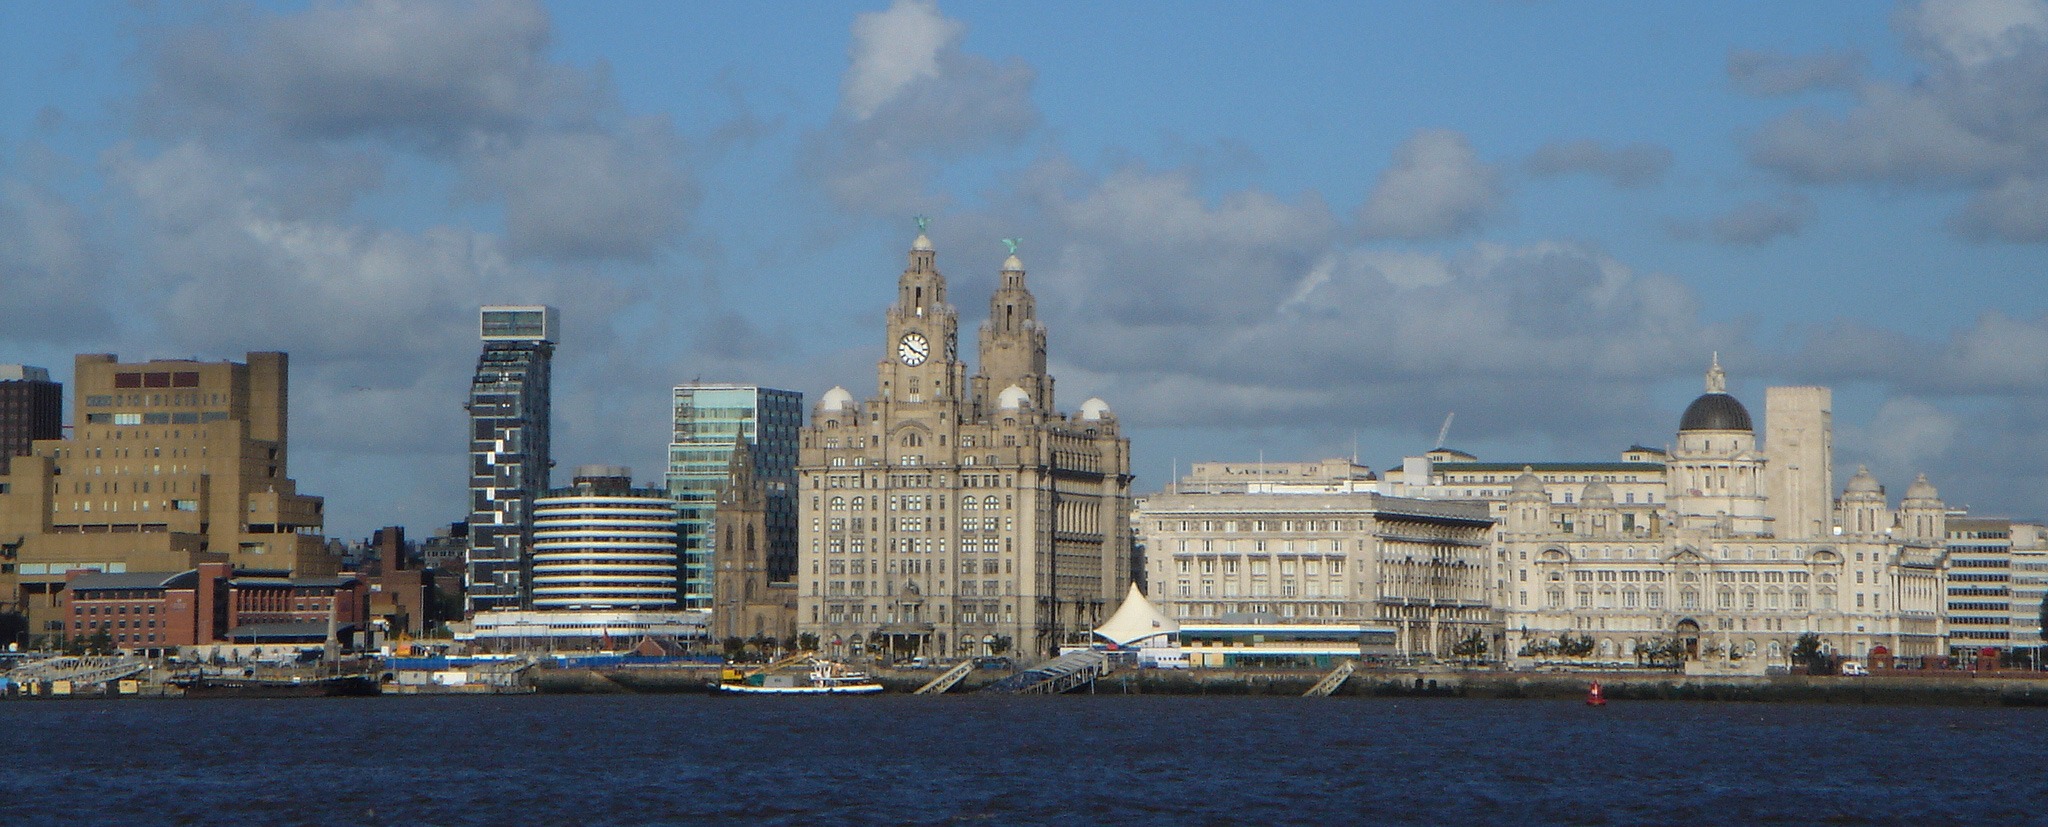 Can Liverpool be World's first Autism friendly city?